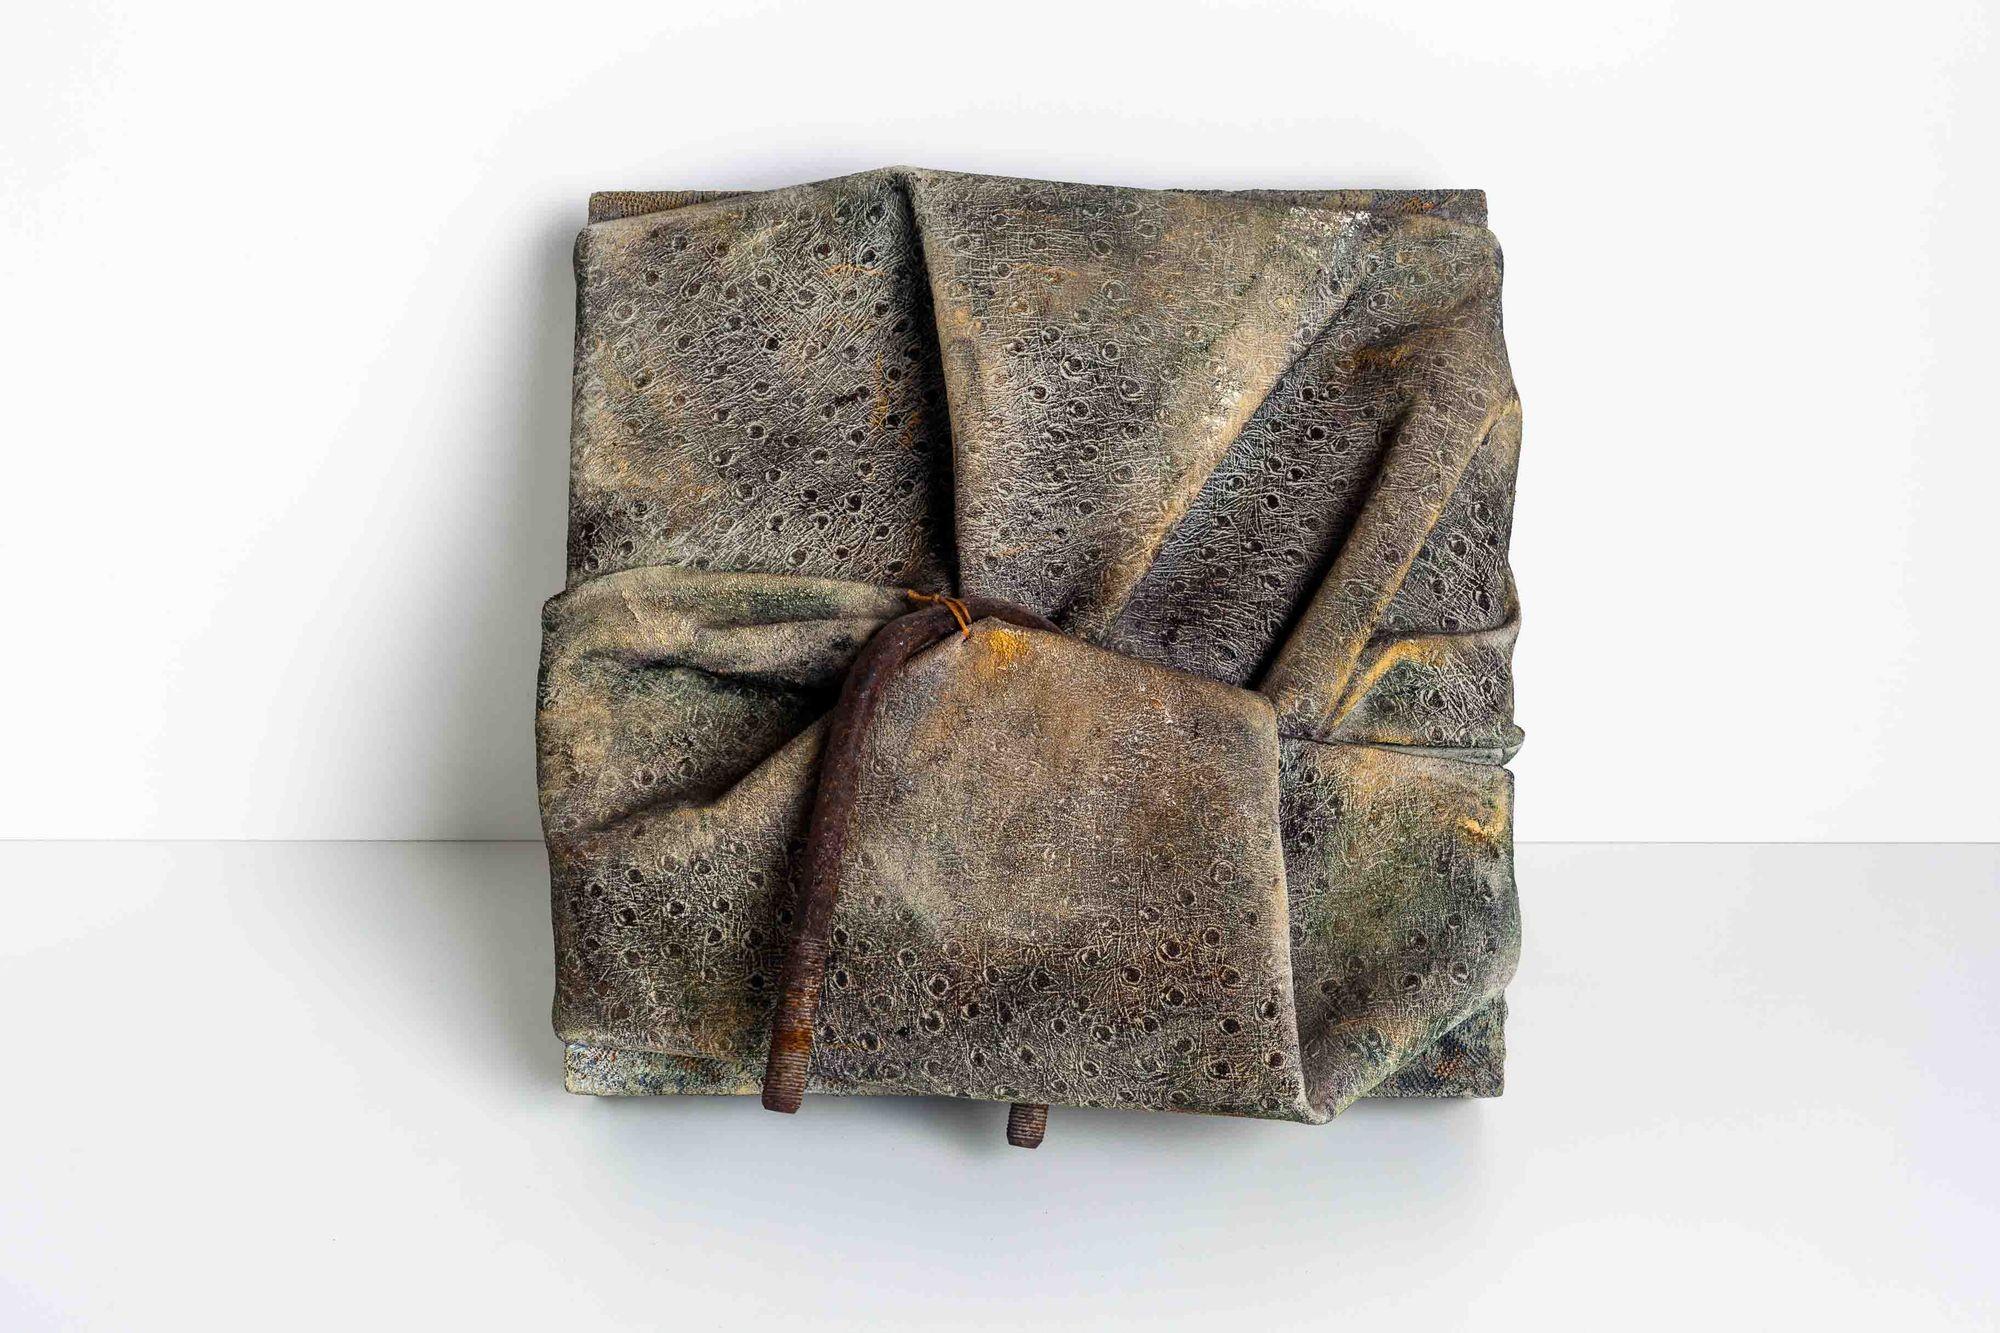 Diane Cooper Mixed Media over Wood Wall Mounted Bundle Sculpture, From Ruth Horwich collection.
Textures Canvas and Metal
About Diane Cooper:
Inspired by the visual culture in Japan, Diane Cooper’s subtle use of materials makes use of aged and worn